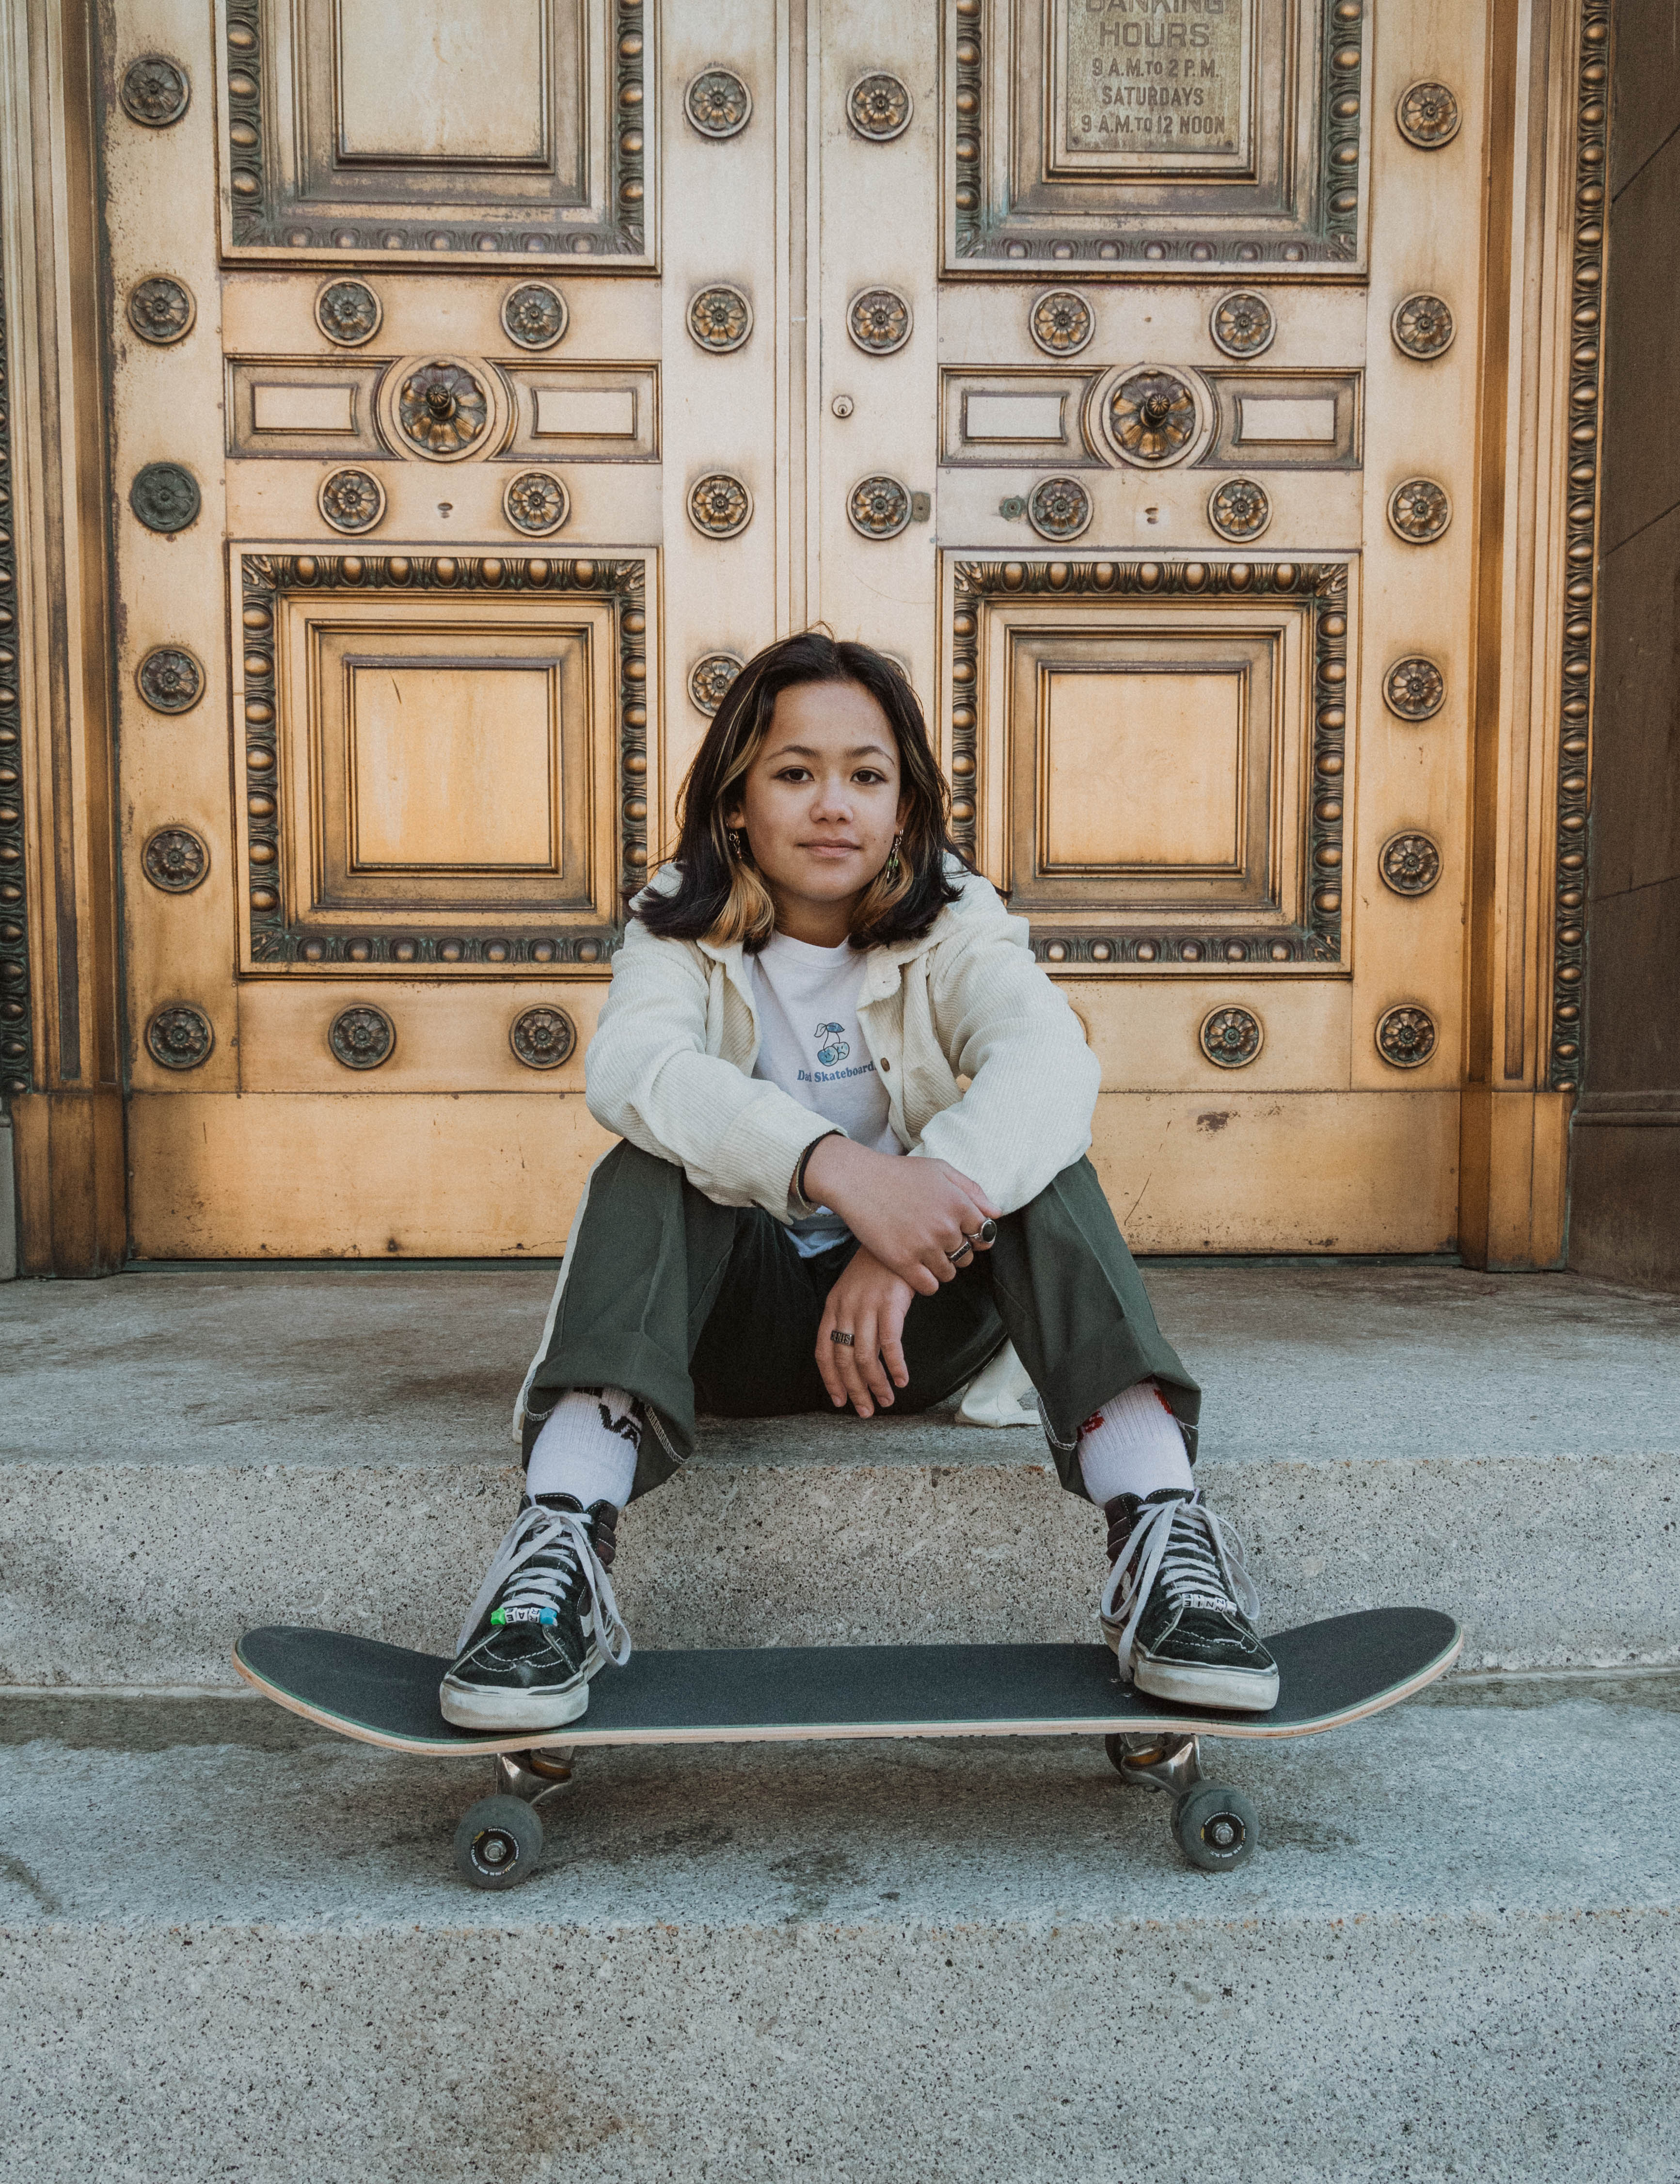 Skateboarding: A Window to a Thrilling World of Adventure | Dad